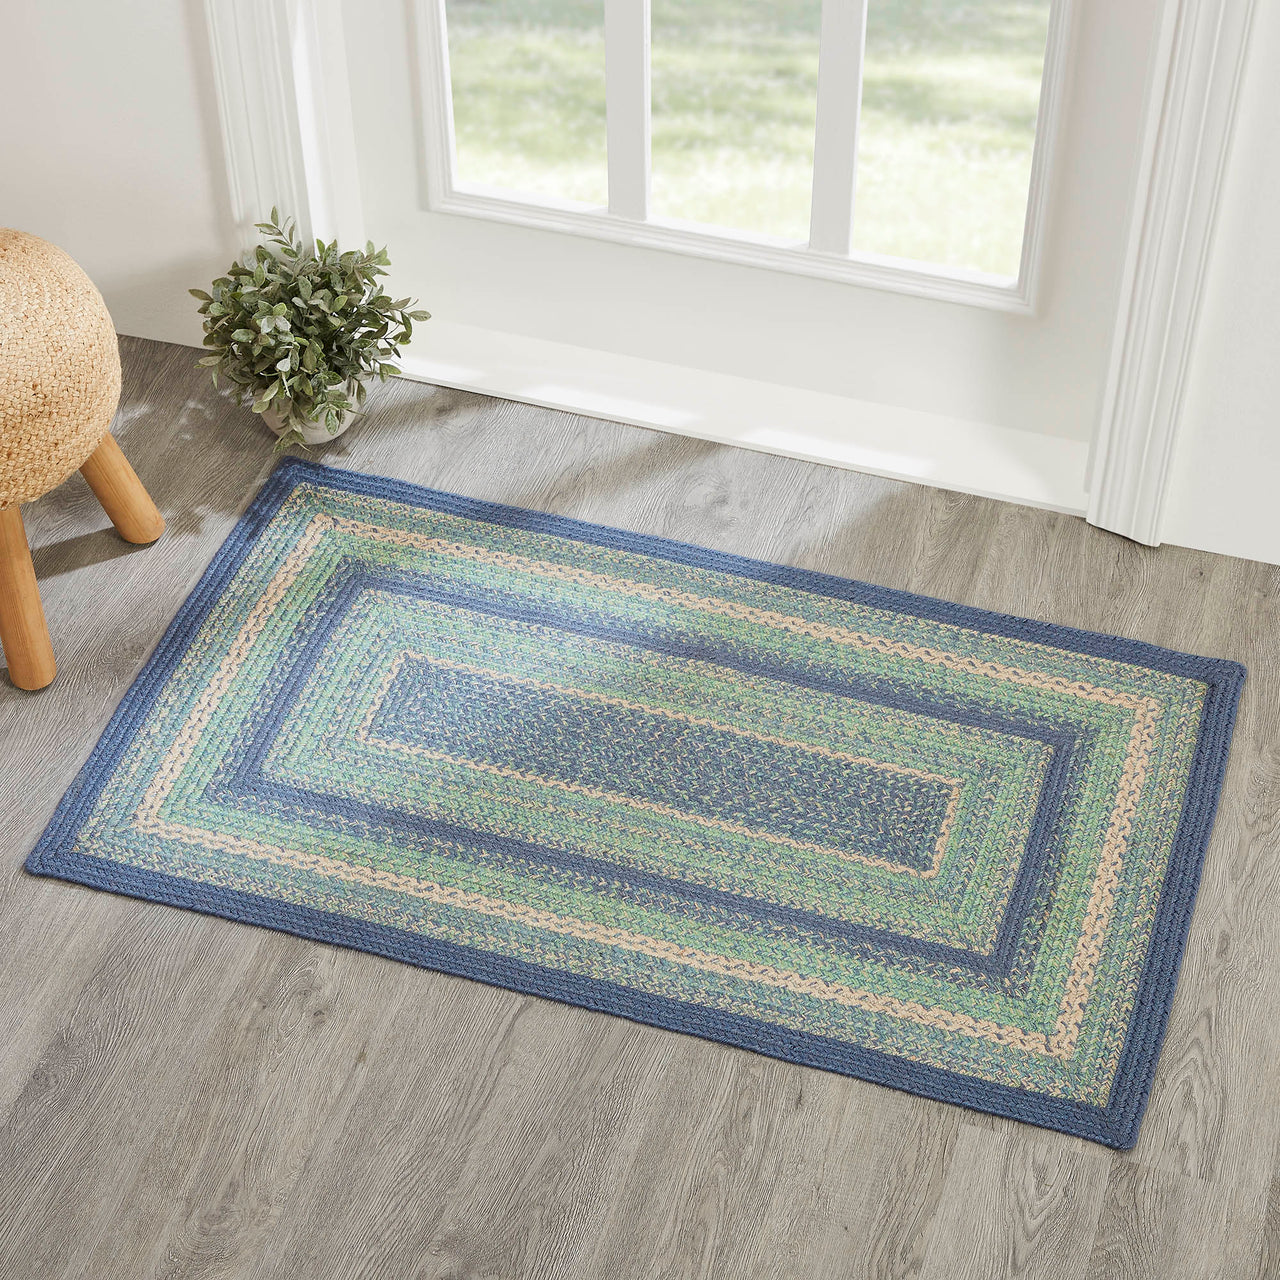 Jolie Braided Jute Rectangle Rugs with Rug Pad - VHC Brands